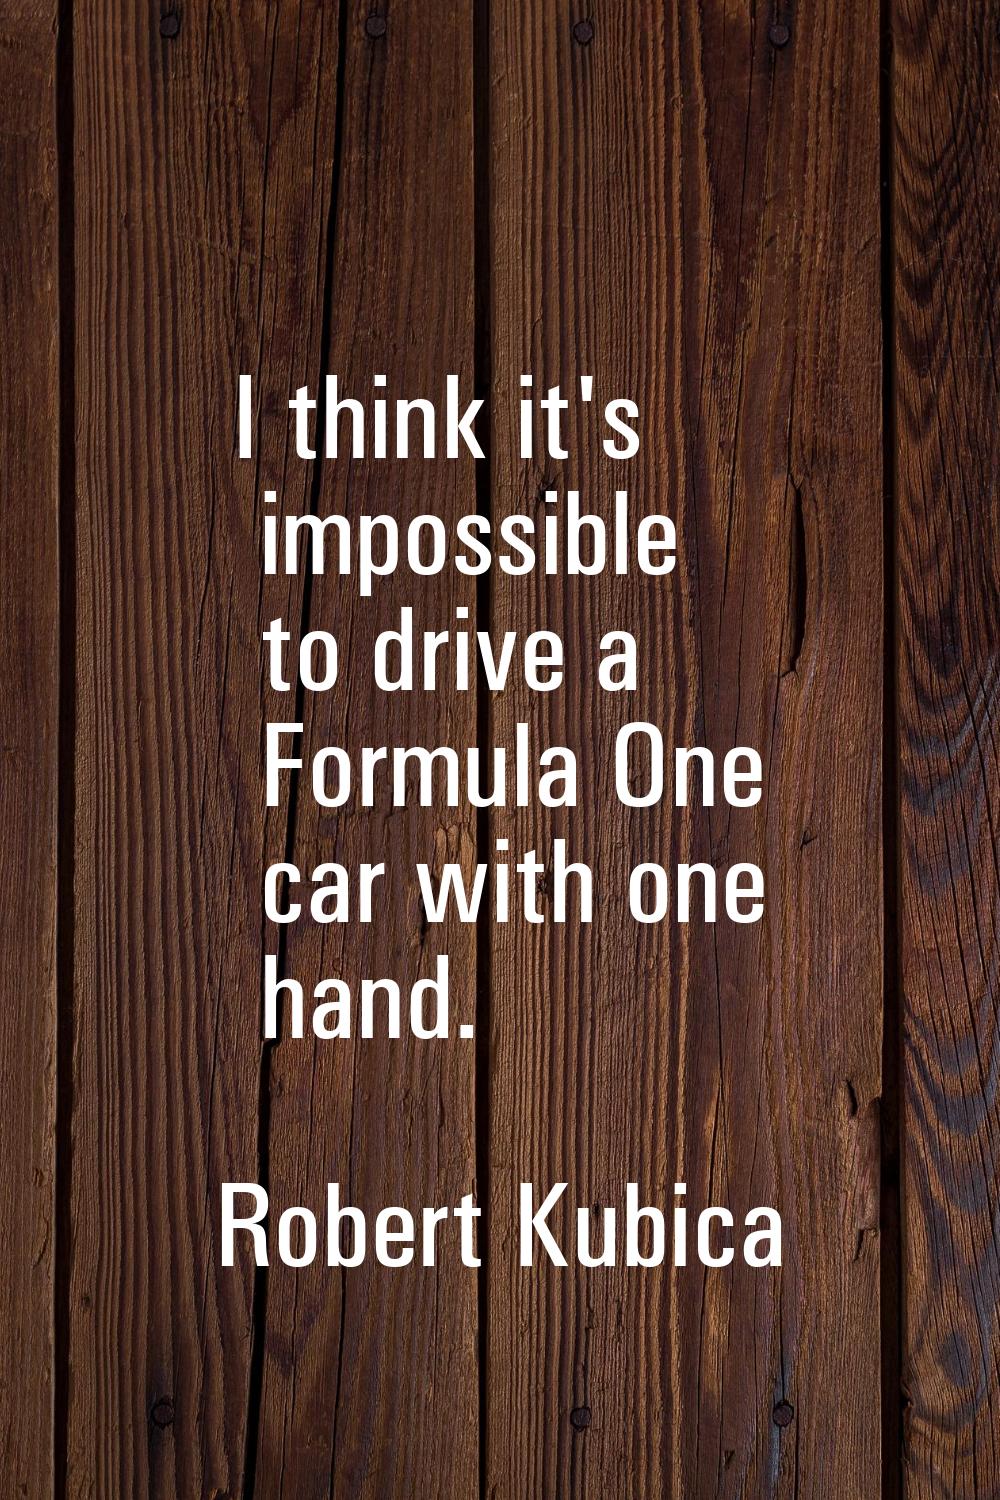 I think it's impossible to drive a Formula One car with one hand.